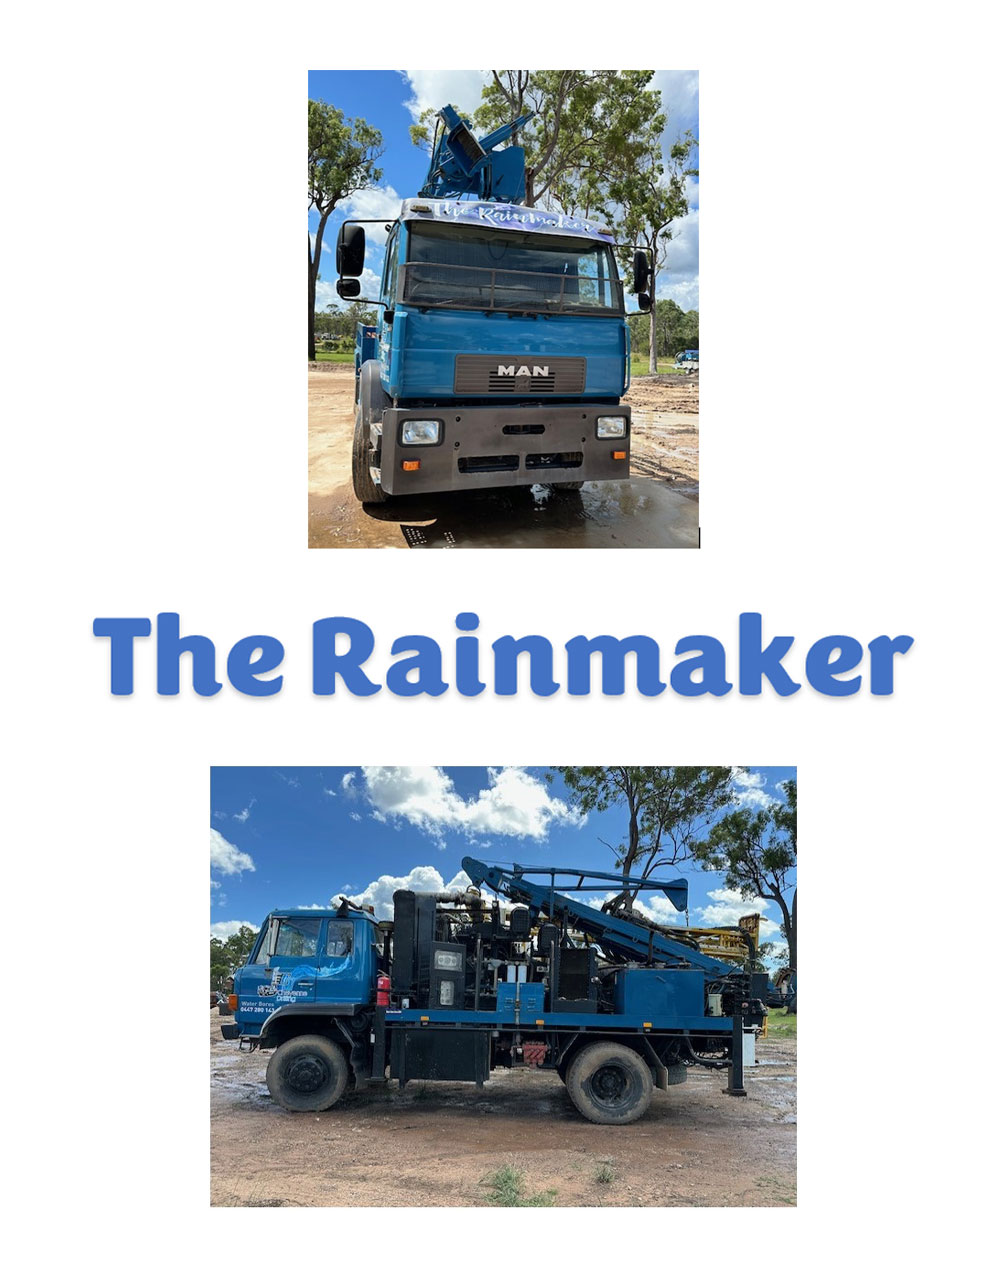 A Blue Man Truck Equipped with A Large Crane Labeled "the Rainmaker" Parked on A Dusty Area with Sparse Vegetation and Cloudy Skies Above — Bore Drilling in Bundaberg, QLD